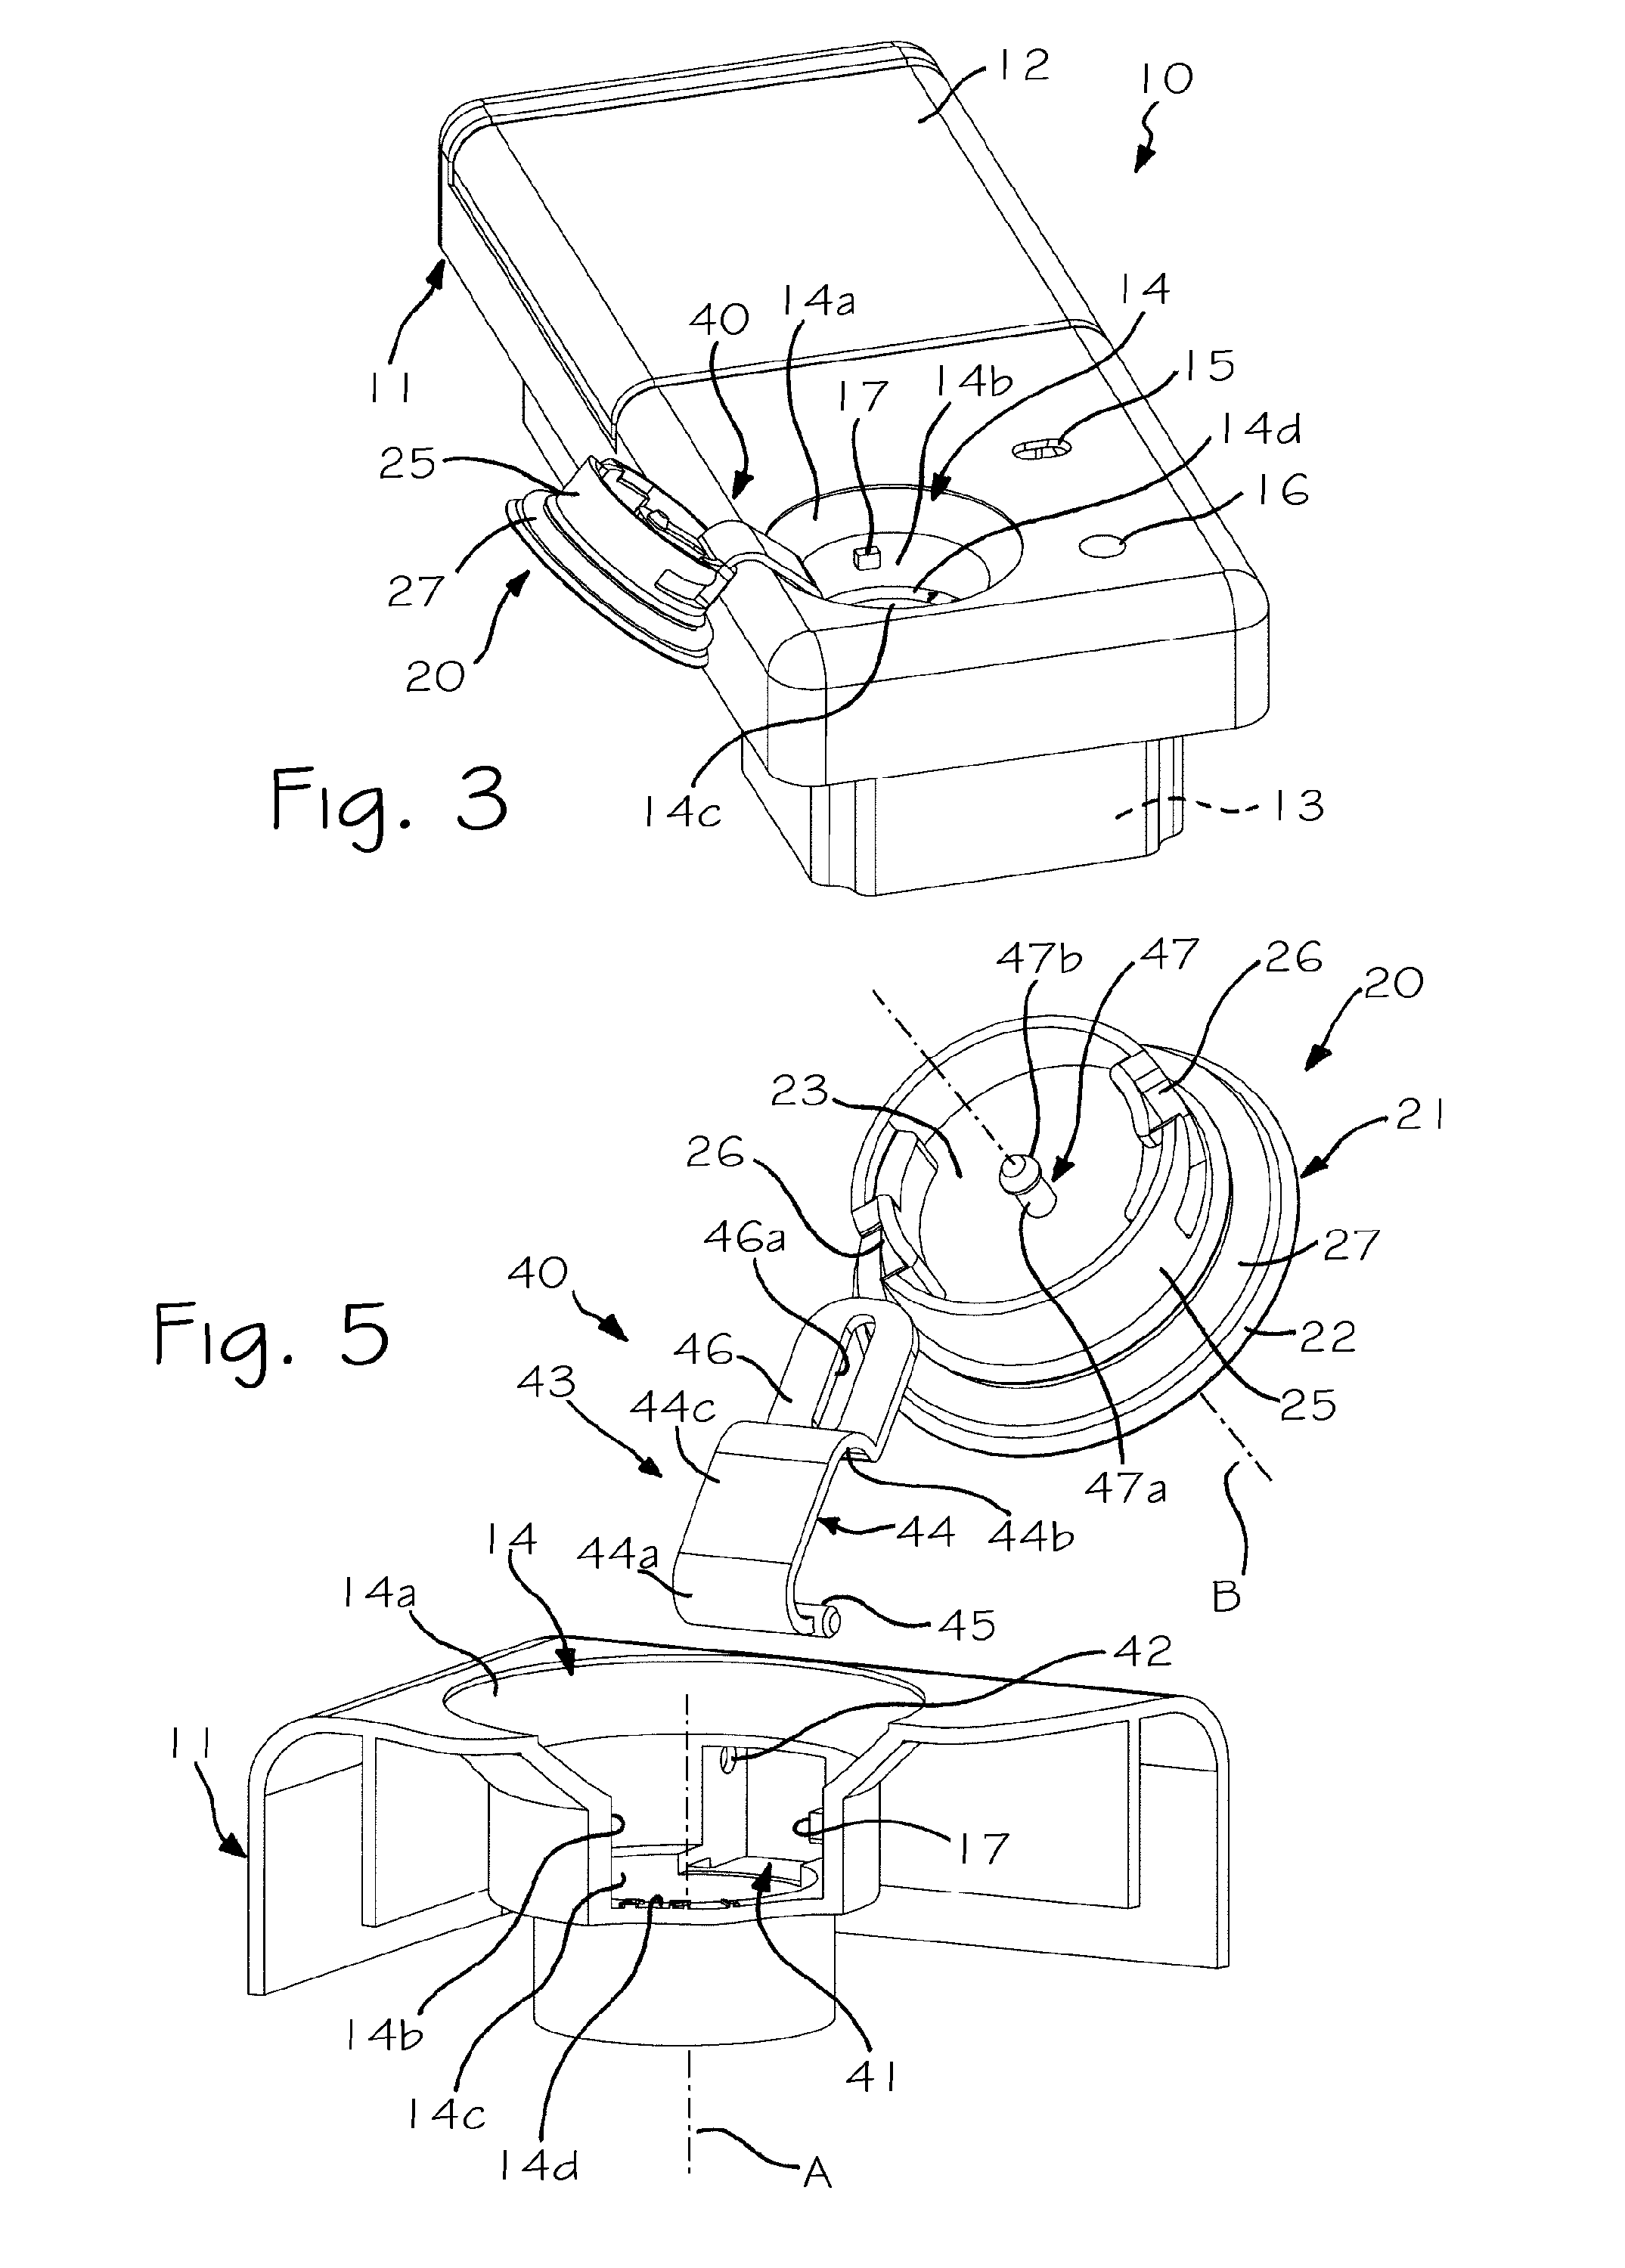 Dispenser of washing agents for a household washing machine, in particular a dishwasher